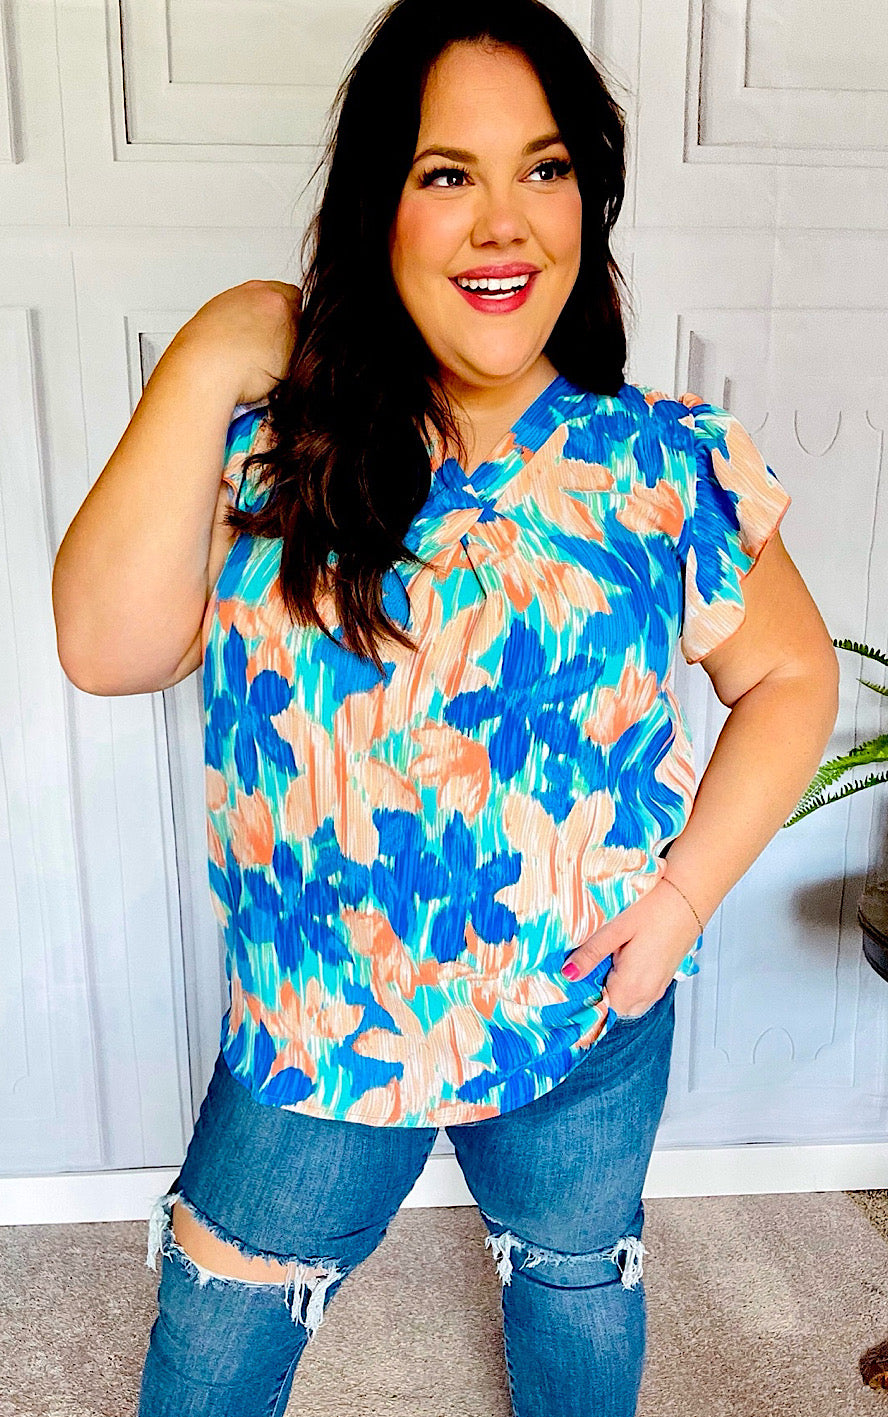 Ocean Breezes Turquoise Floral Top, SMALL LEFT!